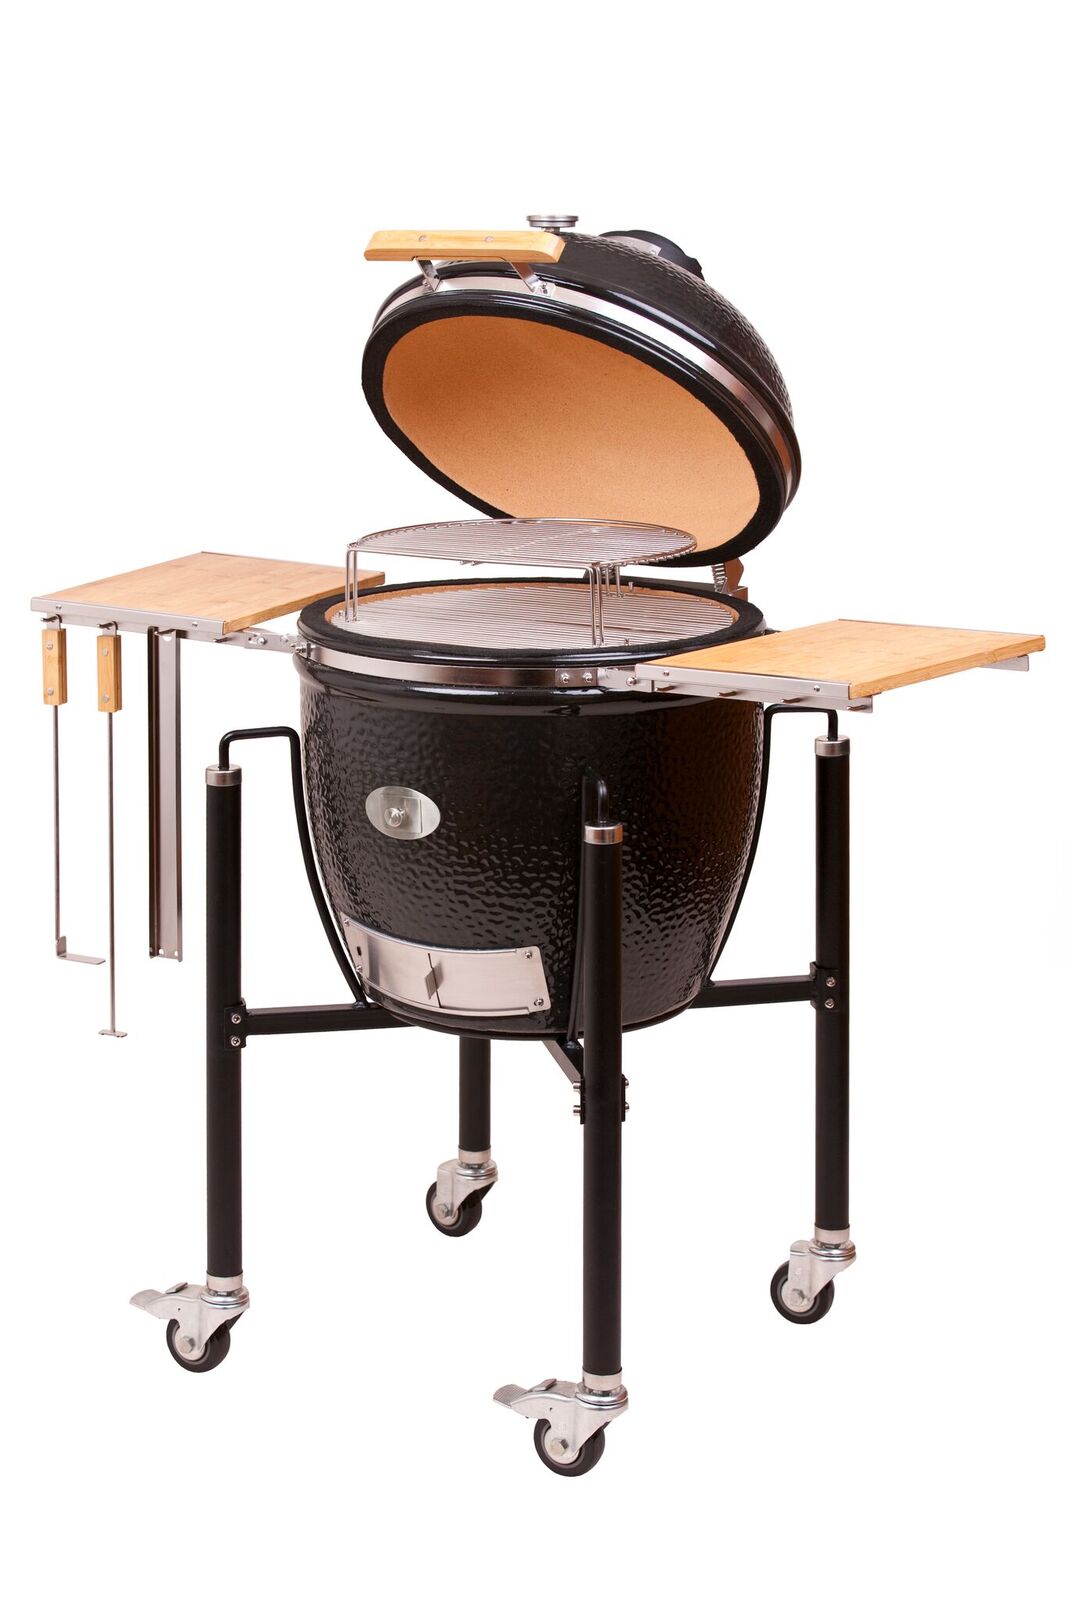 Monolith Classic kamado in black with cart and side shelves